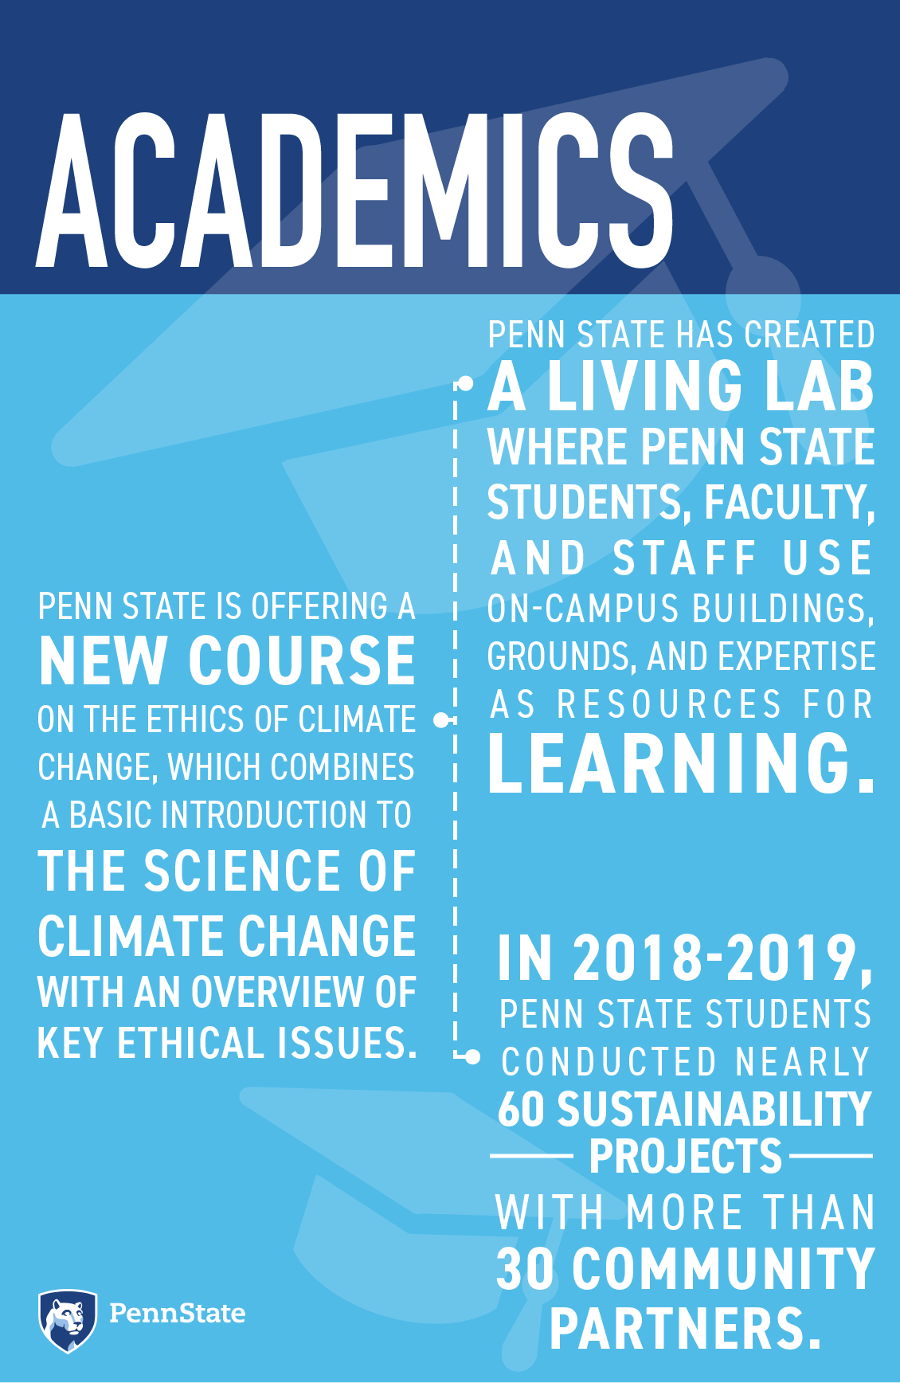 Penn State has created a Living Lab where Penn State students, faculty, and staff use on-campus buildings, grounds, and expertise as resources for learning. Penn State is offering a new course on the Ethics of Climate Change, which combines a basic introduction to the science of climate change with an overview of key ethical issues. In 2018-19, Penn State students conducted nearly 60 sustainability projects with more than 30 community partners.